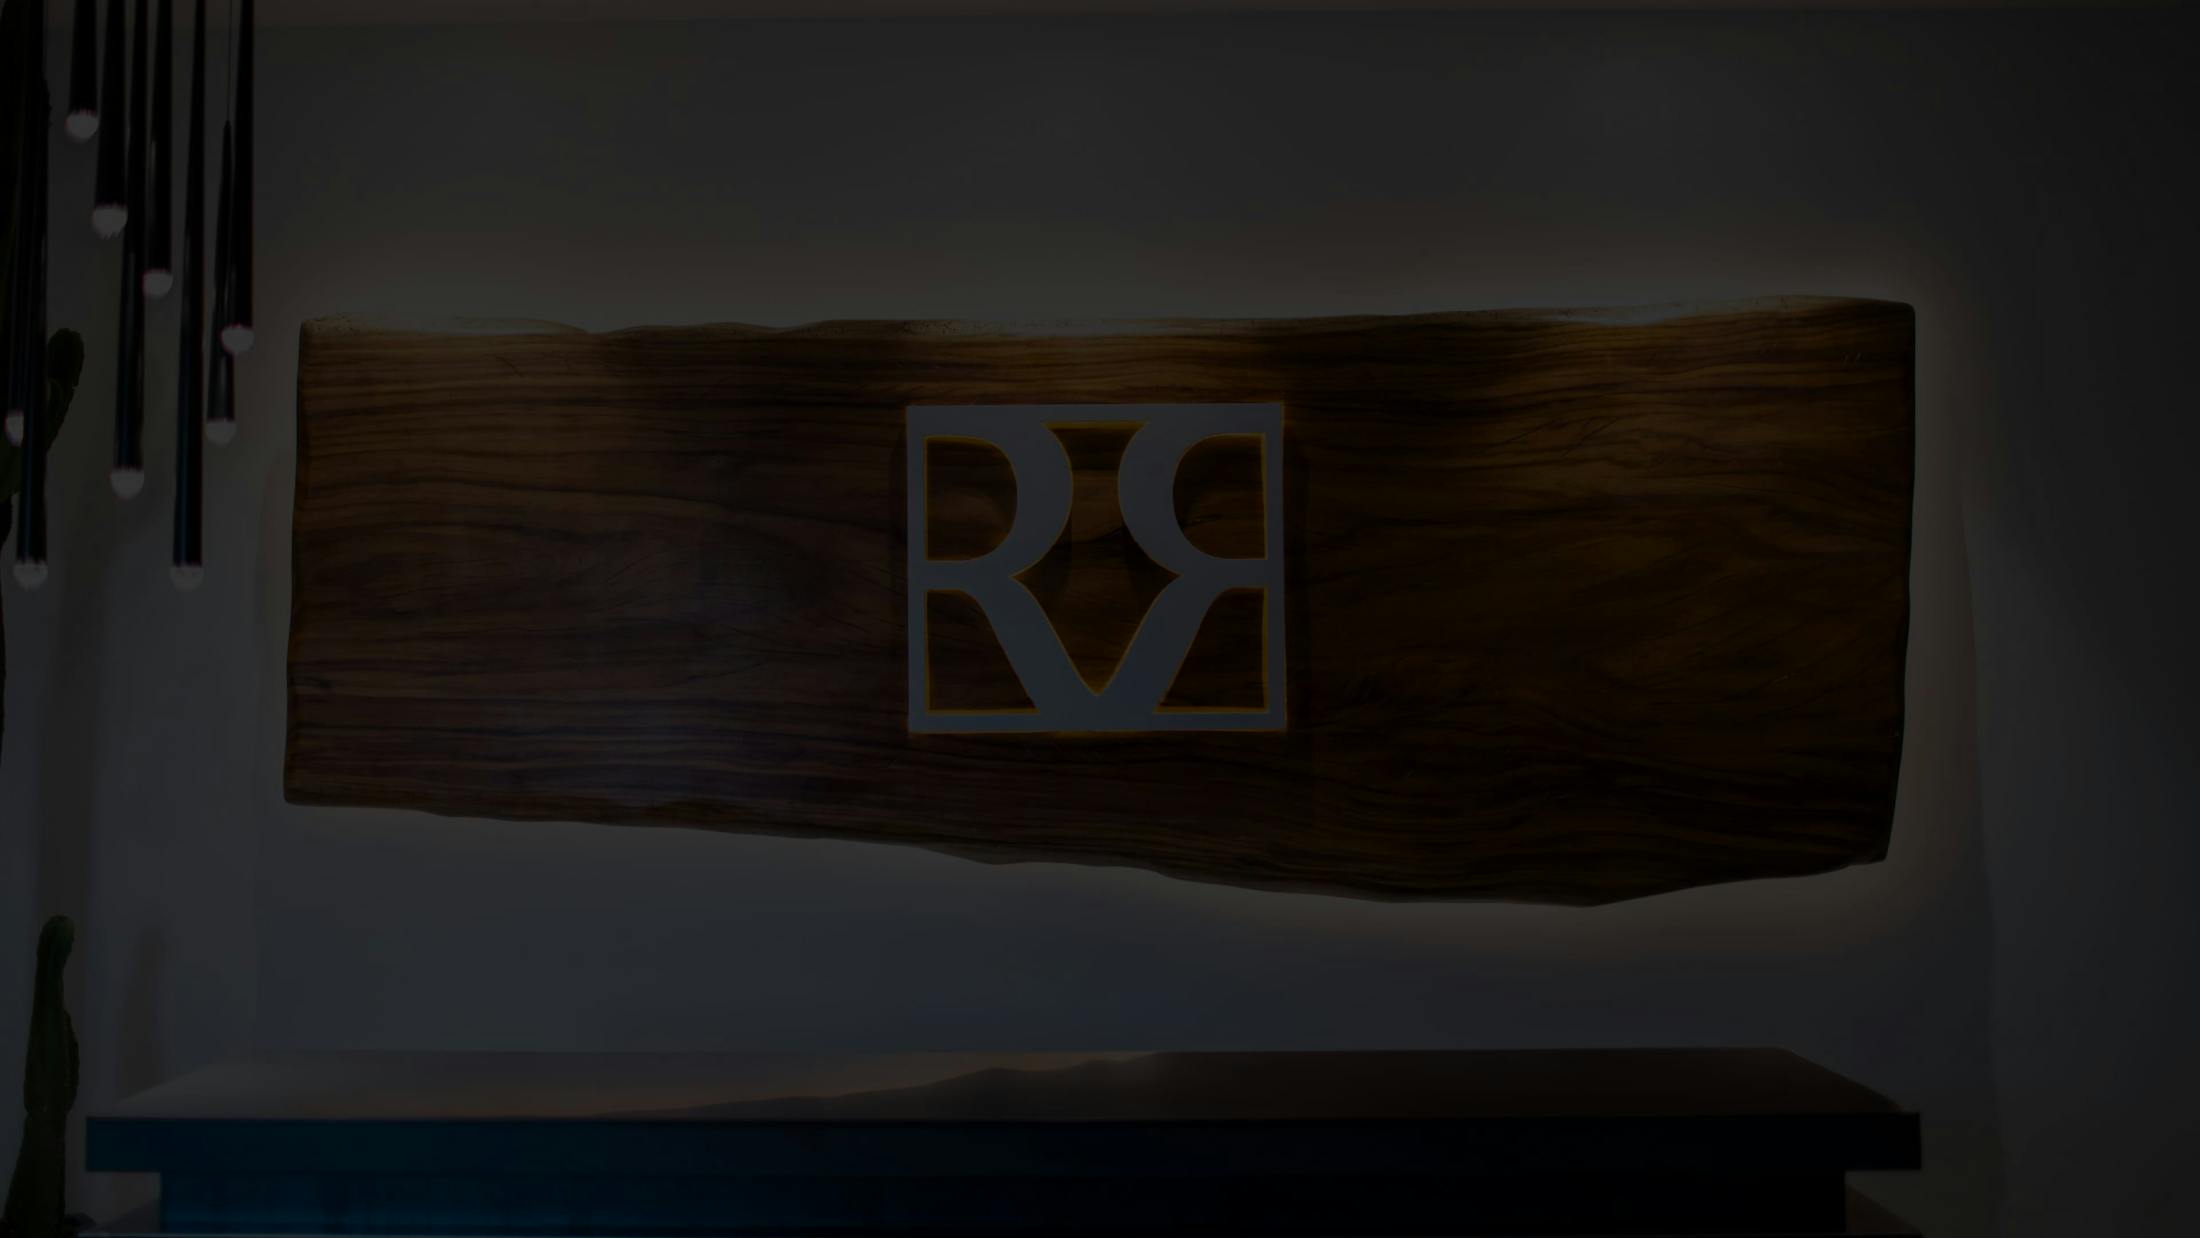 Remus Repta logo on the wall